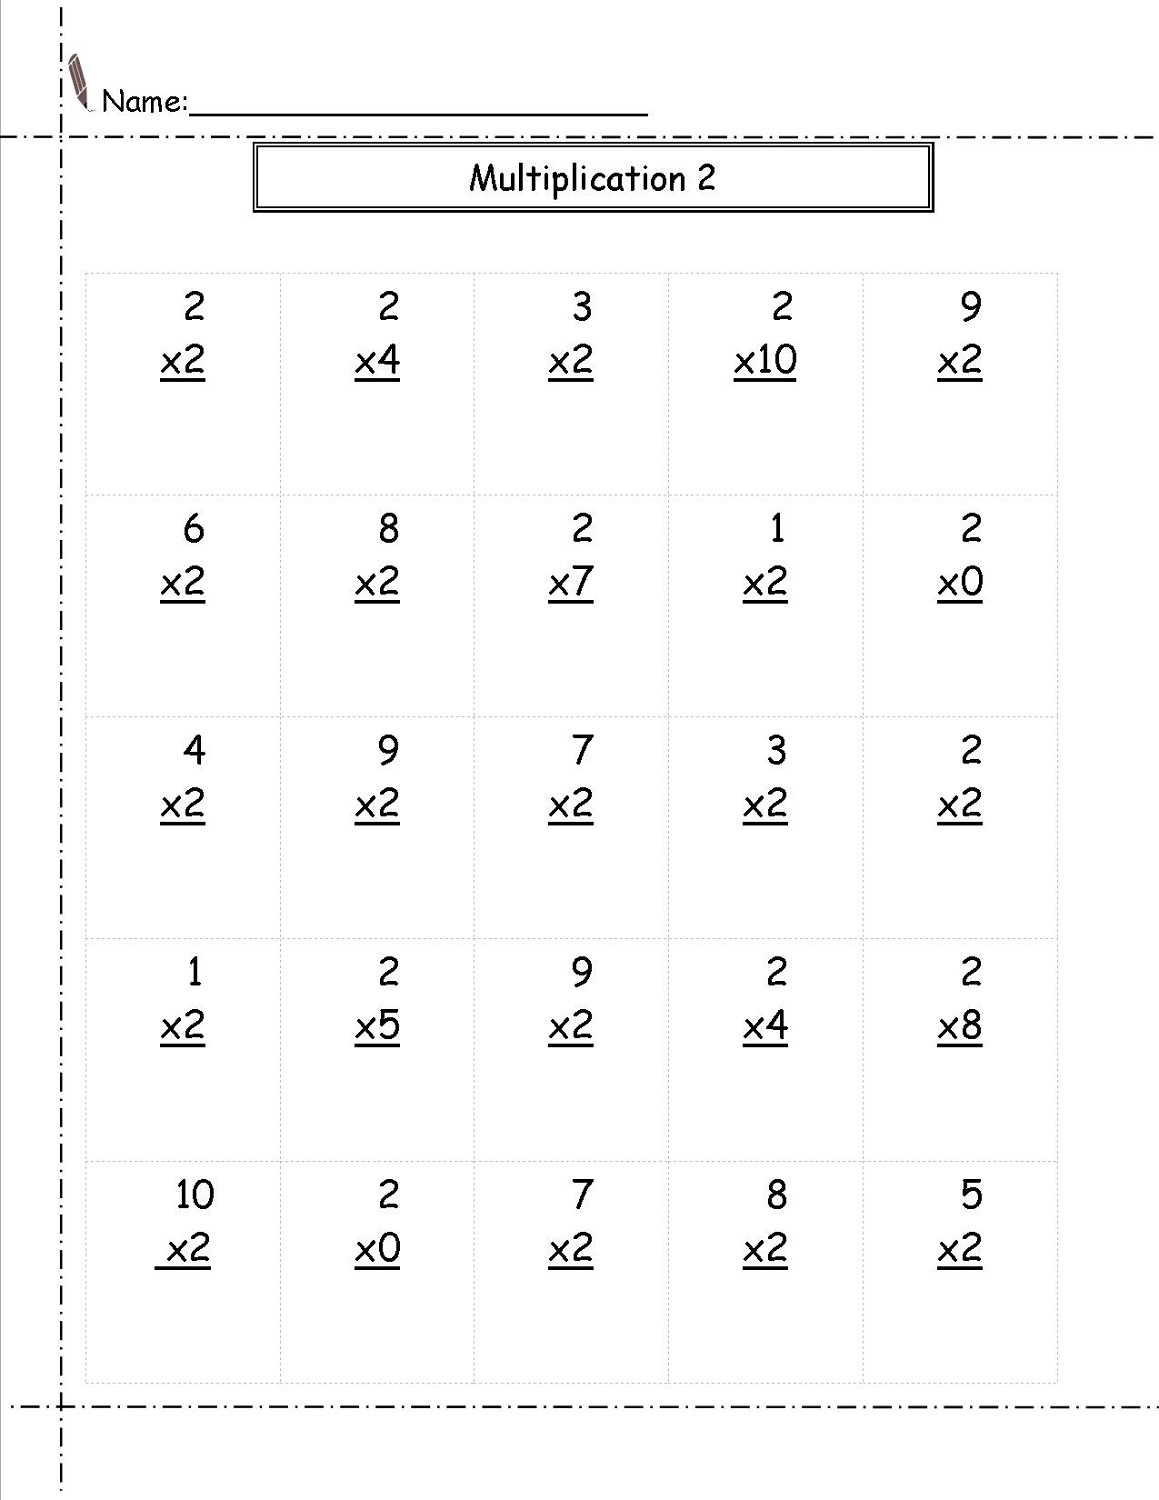 2 times table worksheets for children